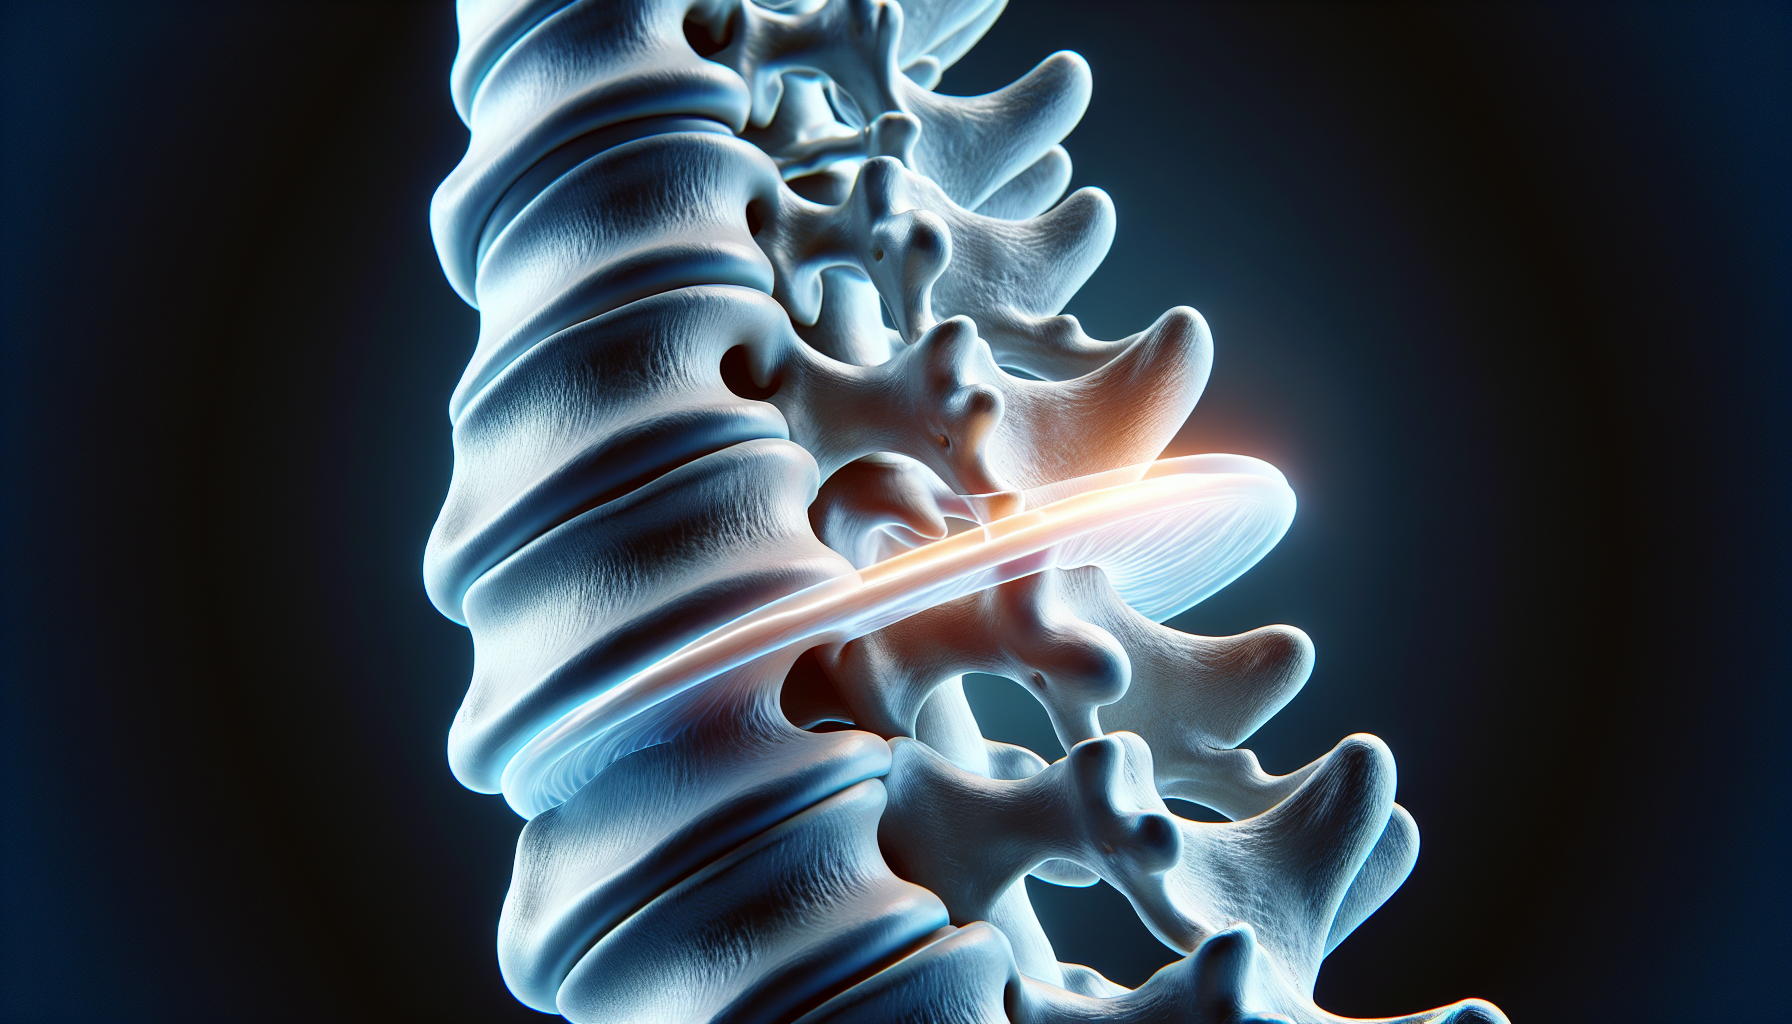 Illustration of spinal discs with bulging disc